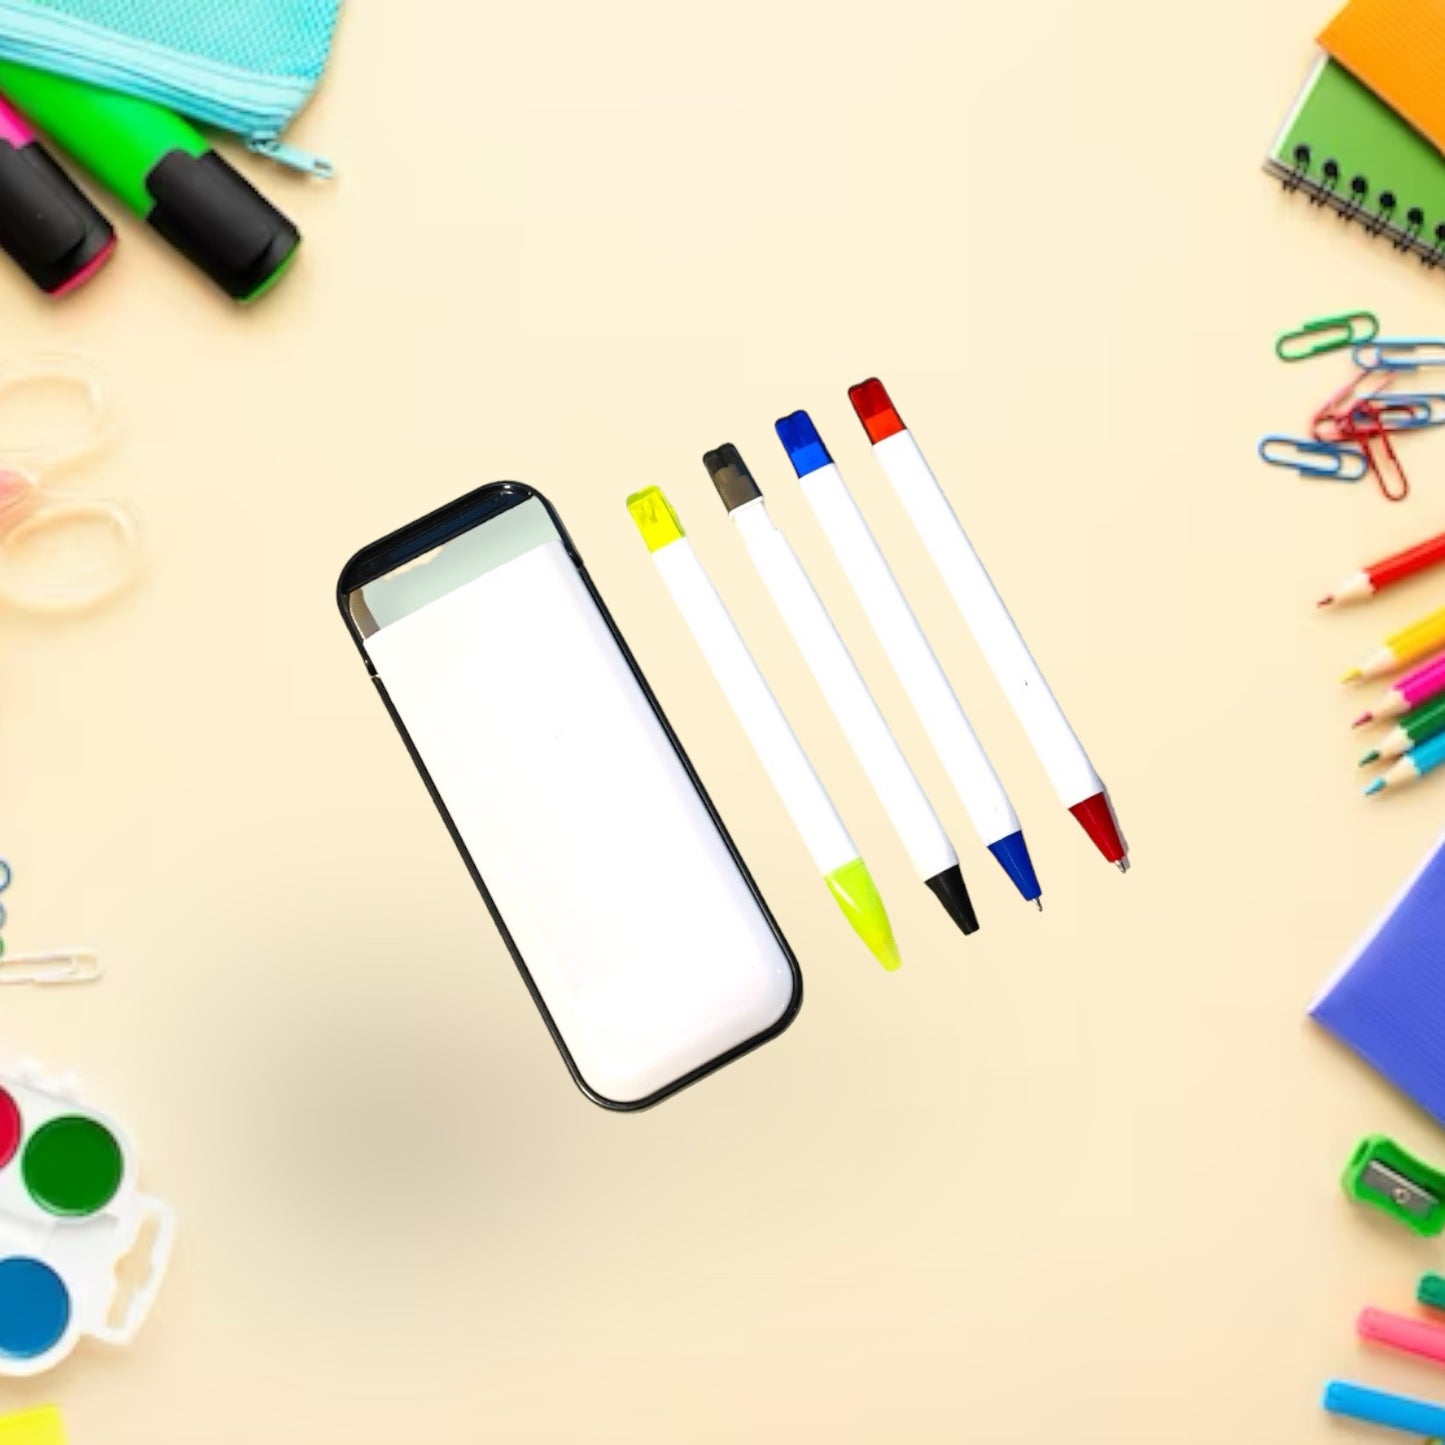 5-in-1 Mobile Stationery Set